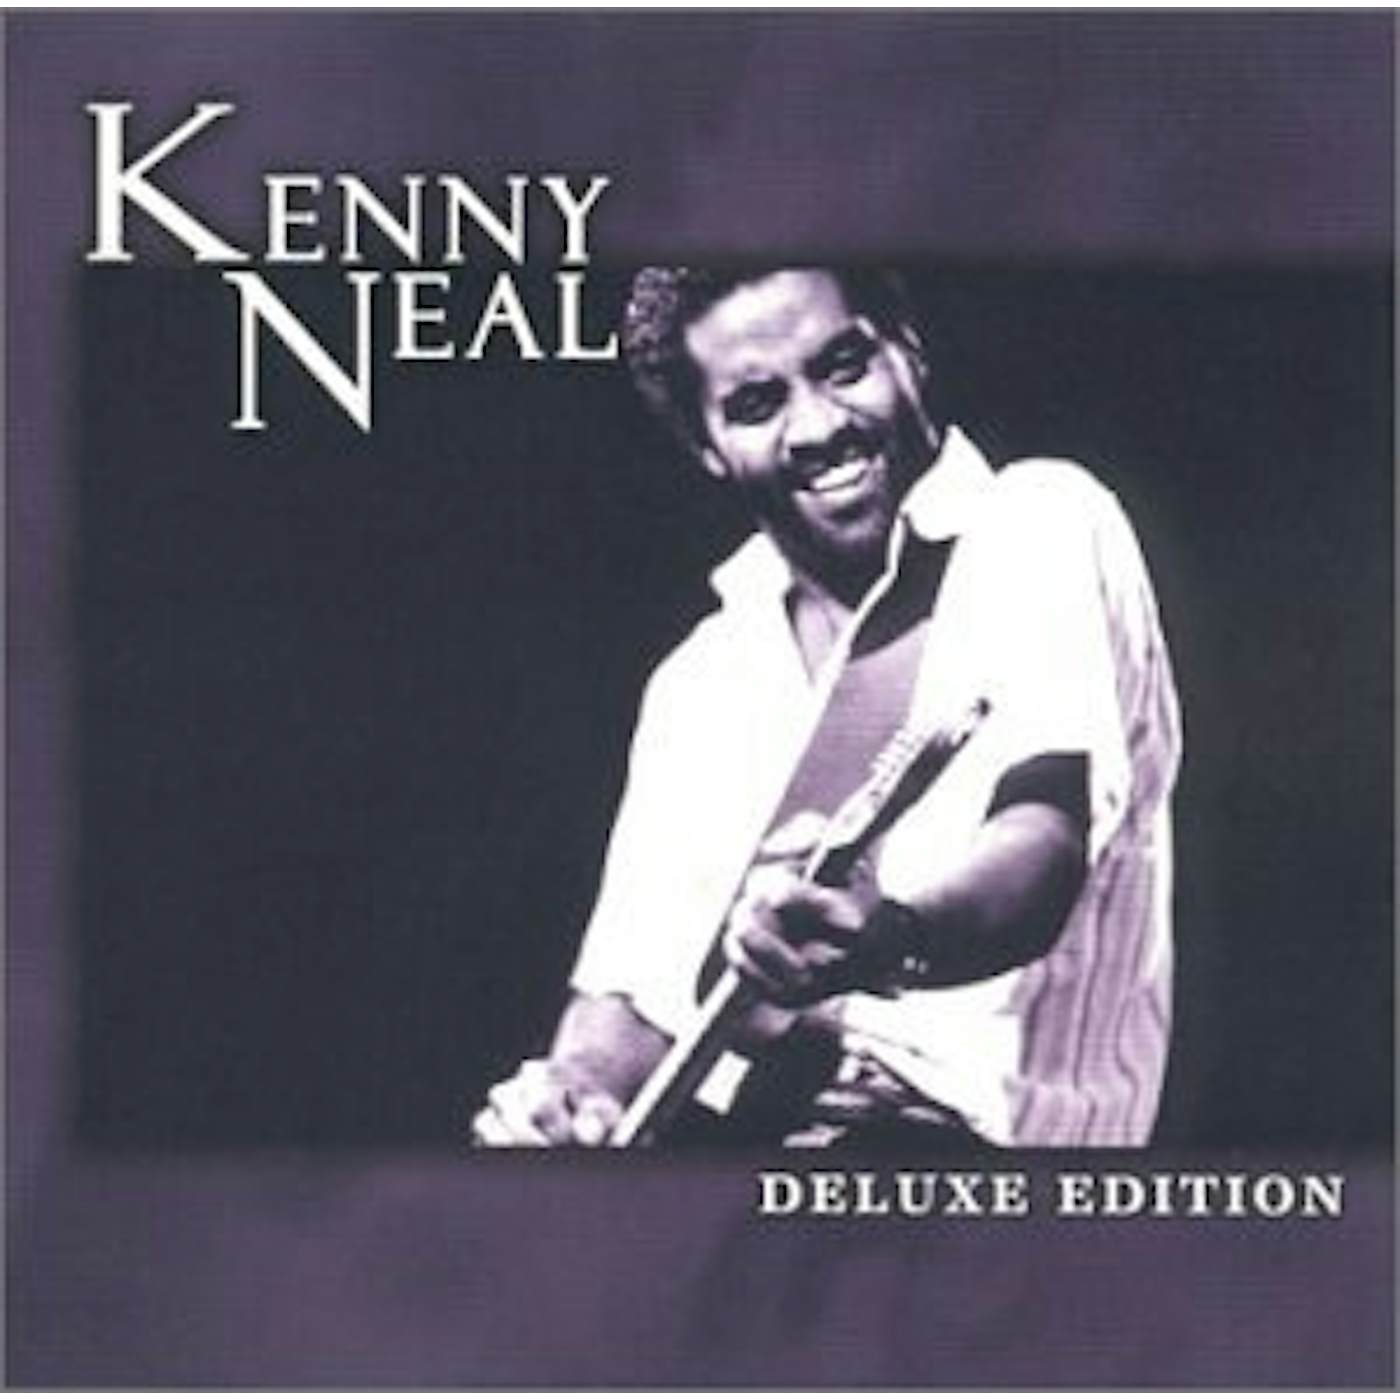 Kenny Neal DELUXE EDITION CD